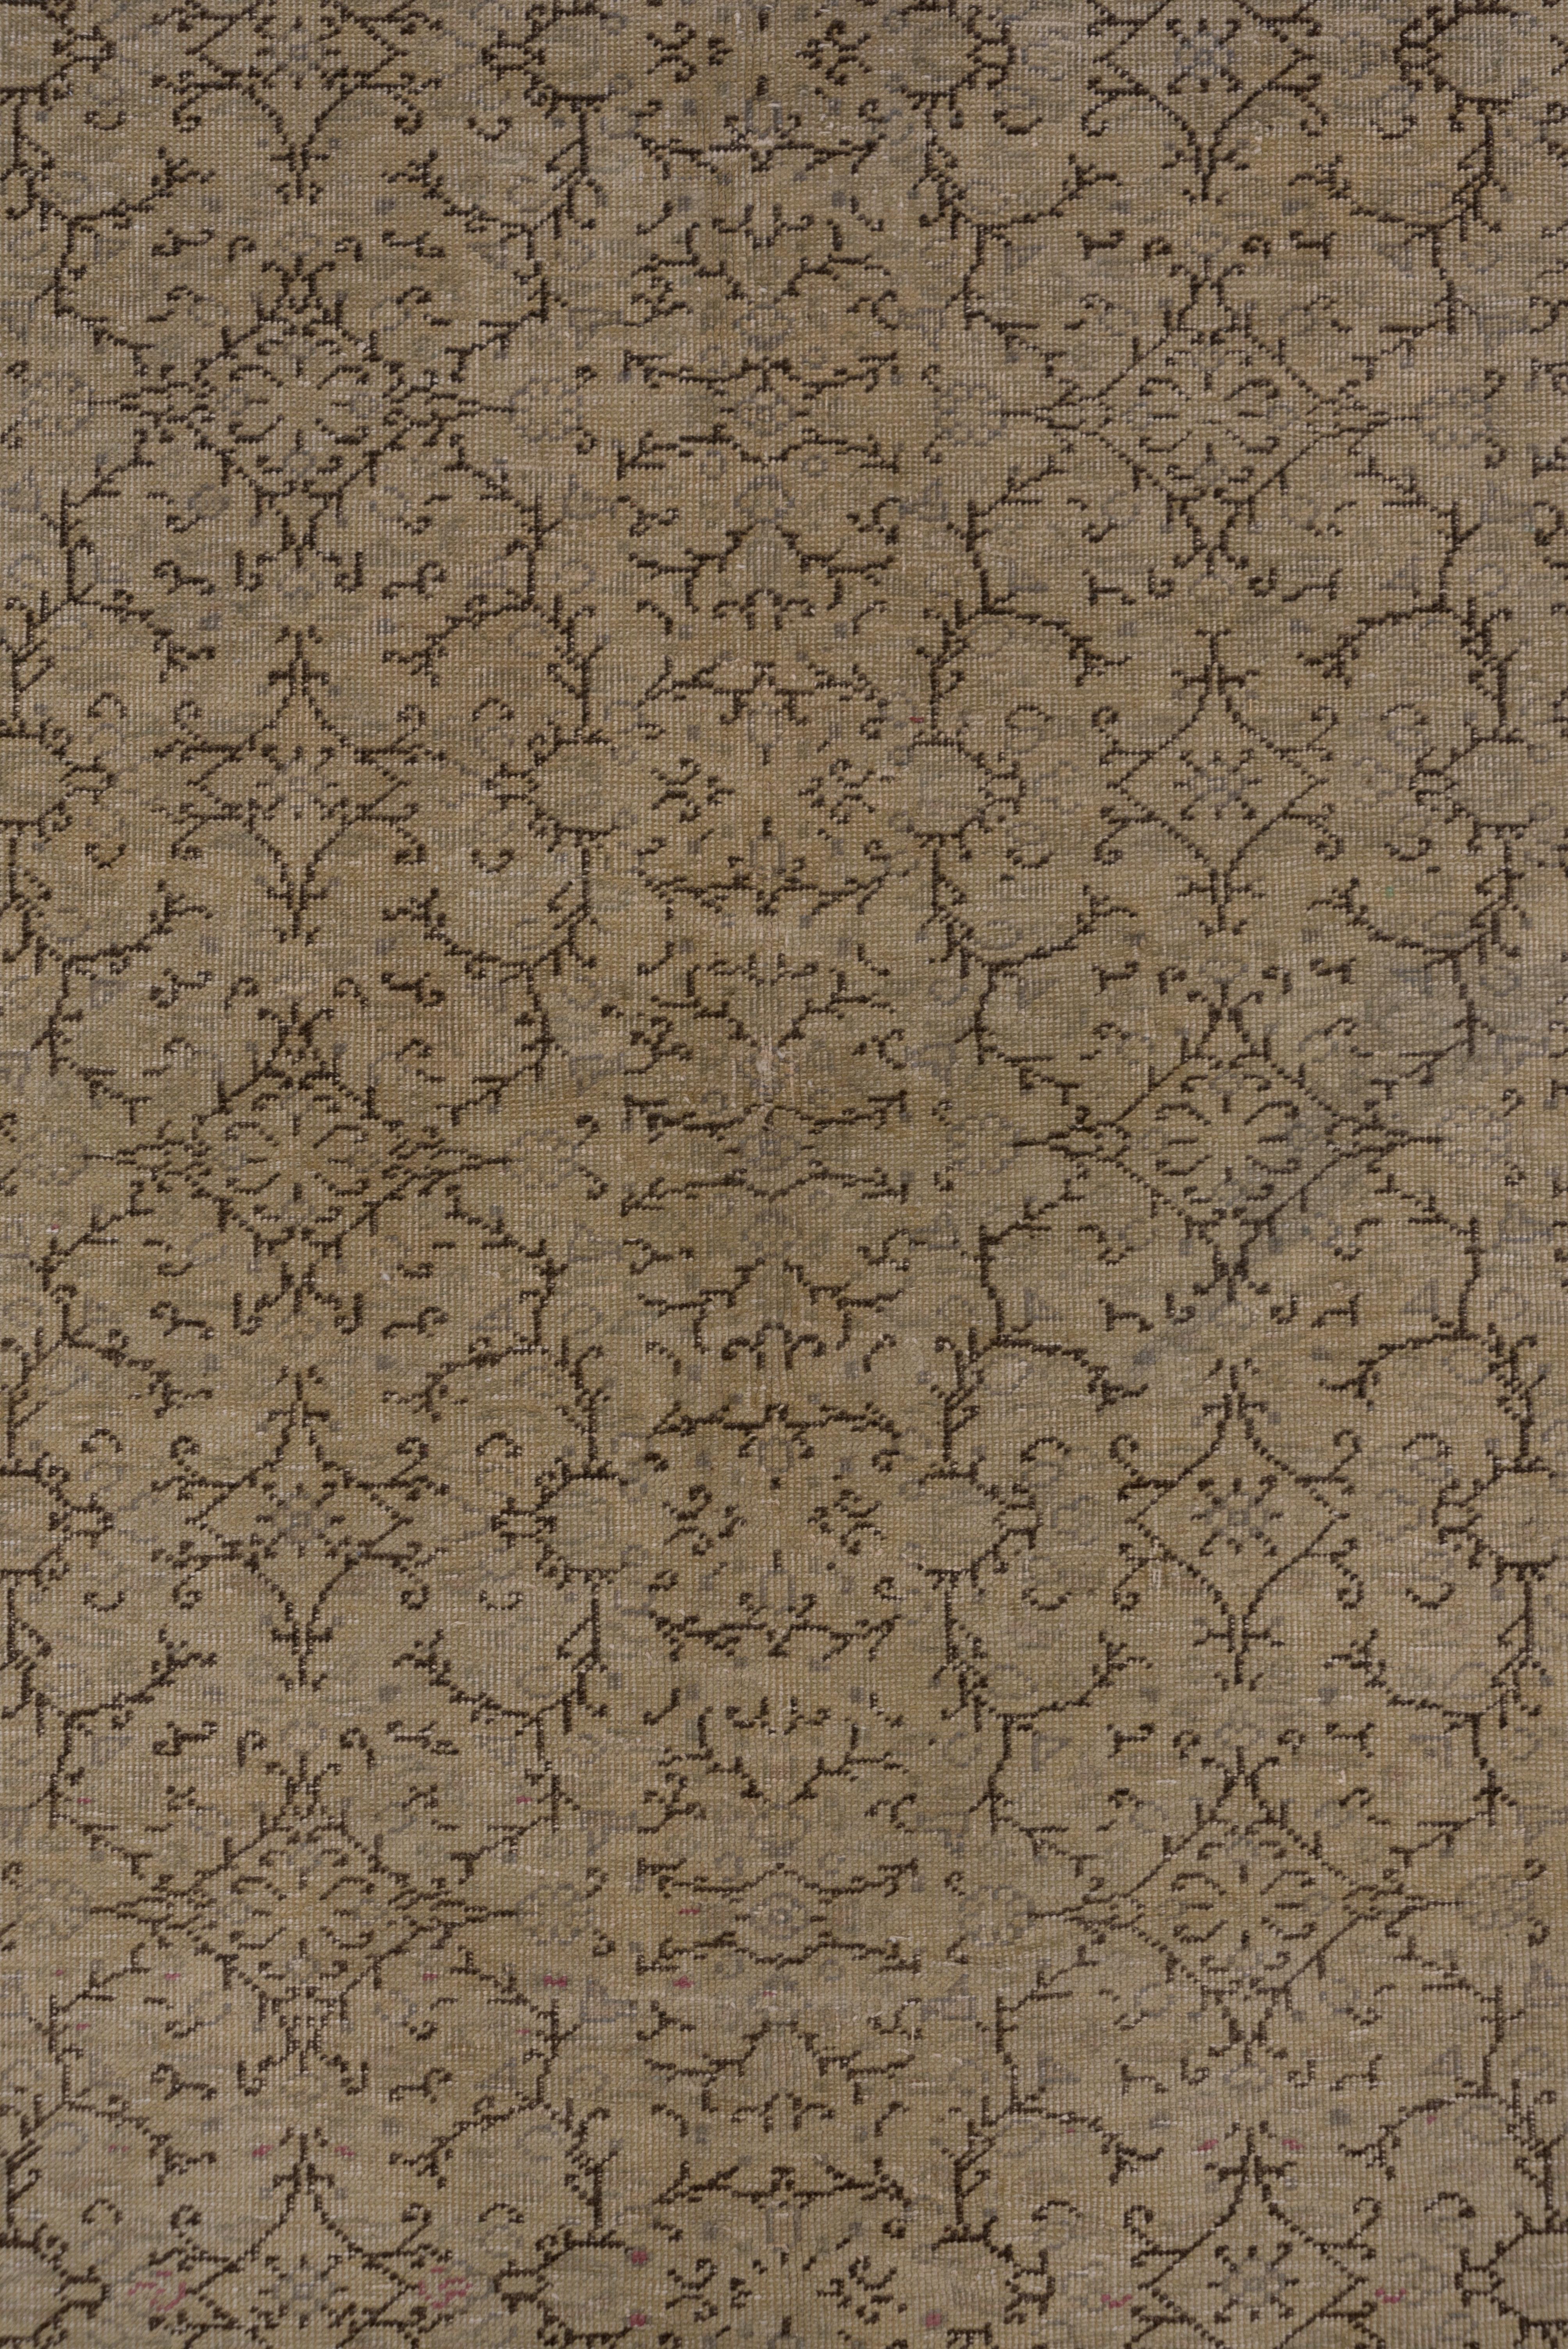 This eastern Anatolian town carpet has a straw ground uniformly decorated with slender open diamonds, and broken and branching short stems in dark brown, and very pale green small flowers. The straw border has ornaments in dark brown, ecru and pale